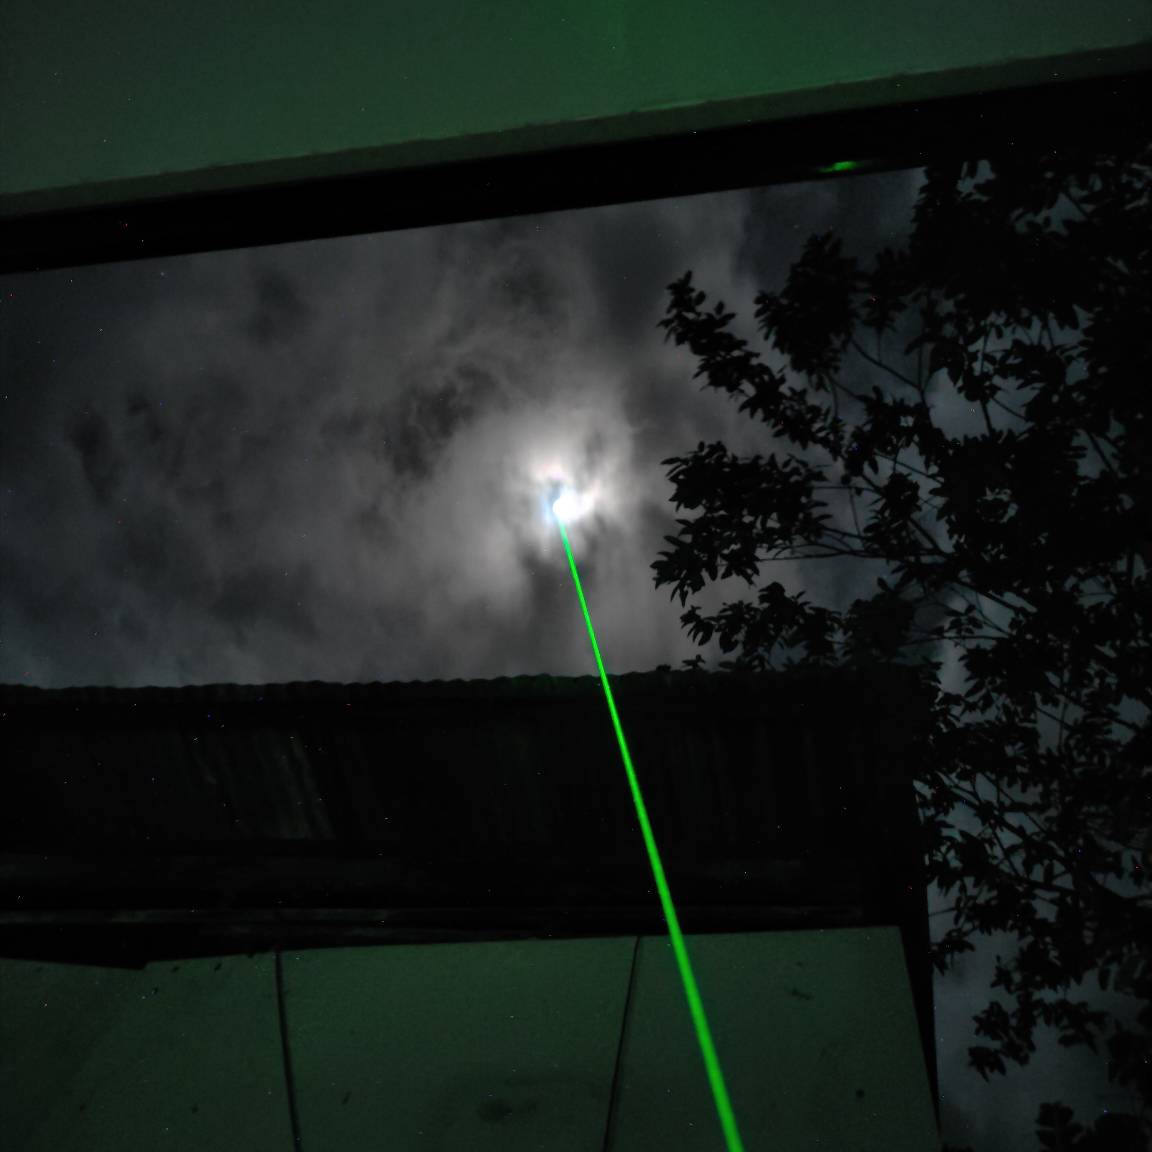 can a laser pointer hit the moon